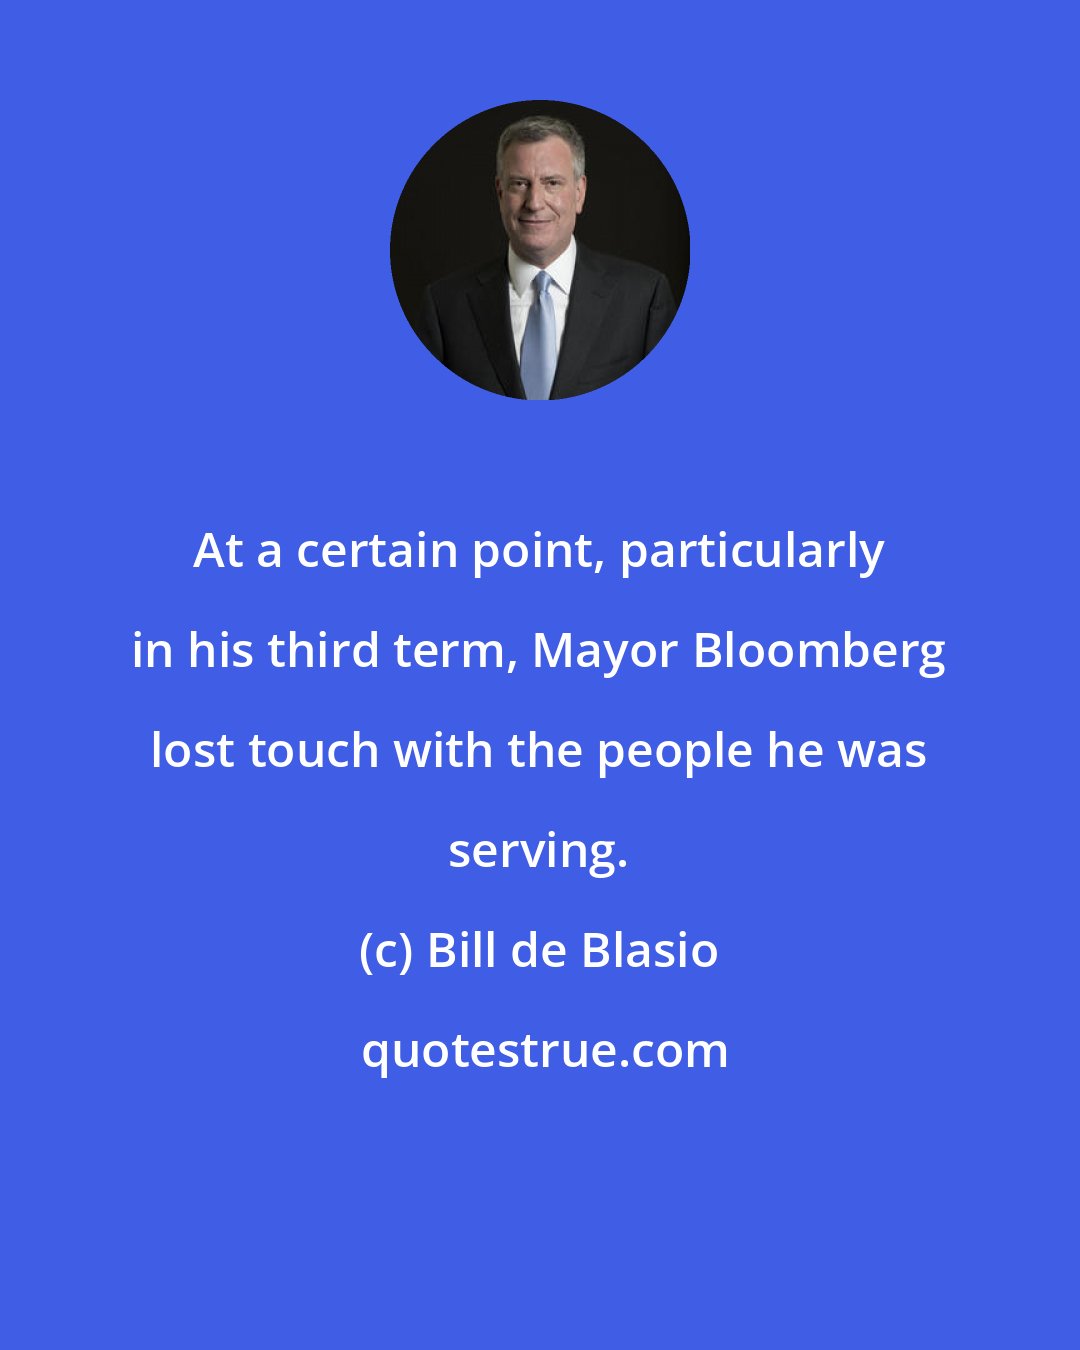 Bill de Blasio: At a certain point, particularly in his third term, Mayor Bloomberg lost touch with the people he was serving.